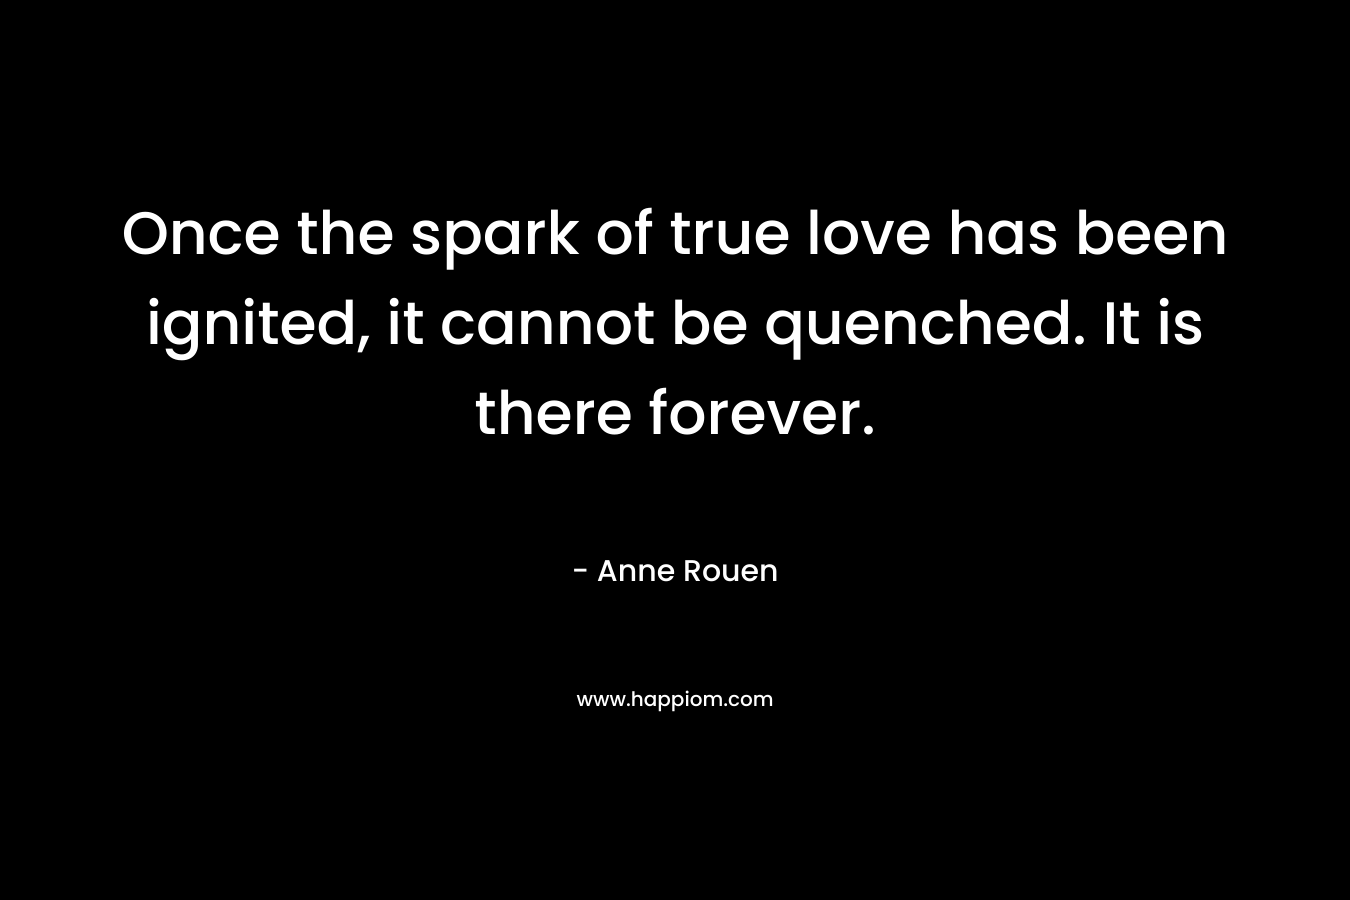 Once the spark of true love has been ignited, it cannot be quenched. It is there forever. – Anne Rouen